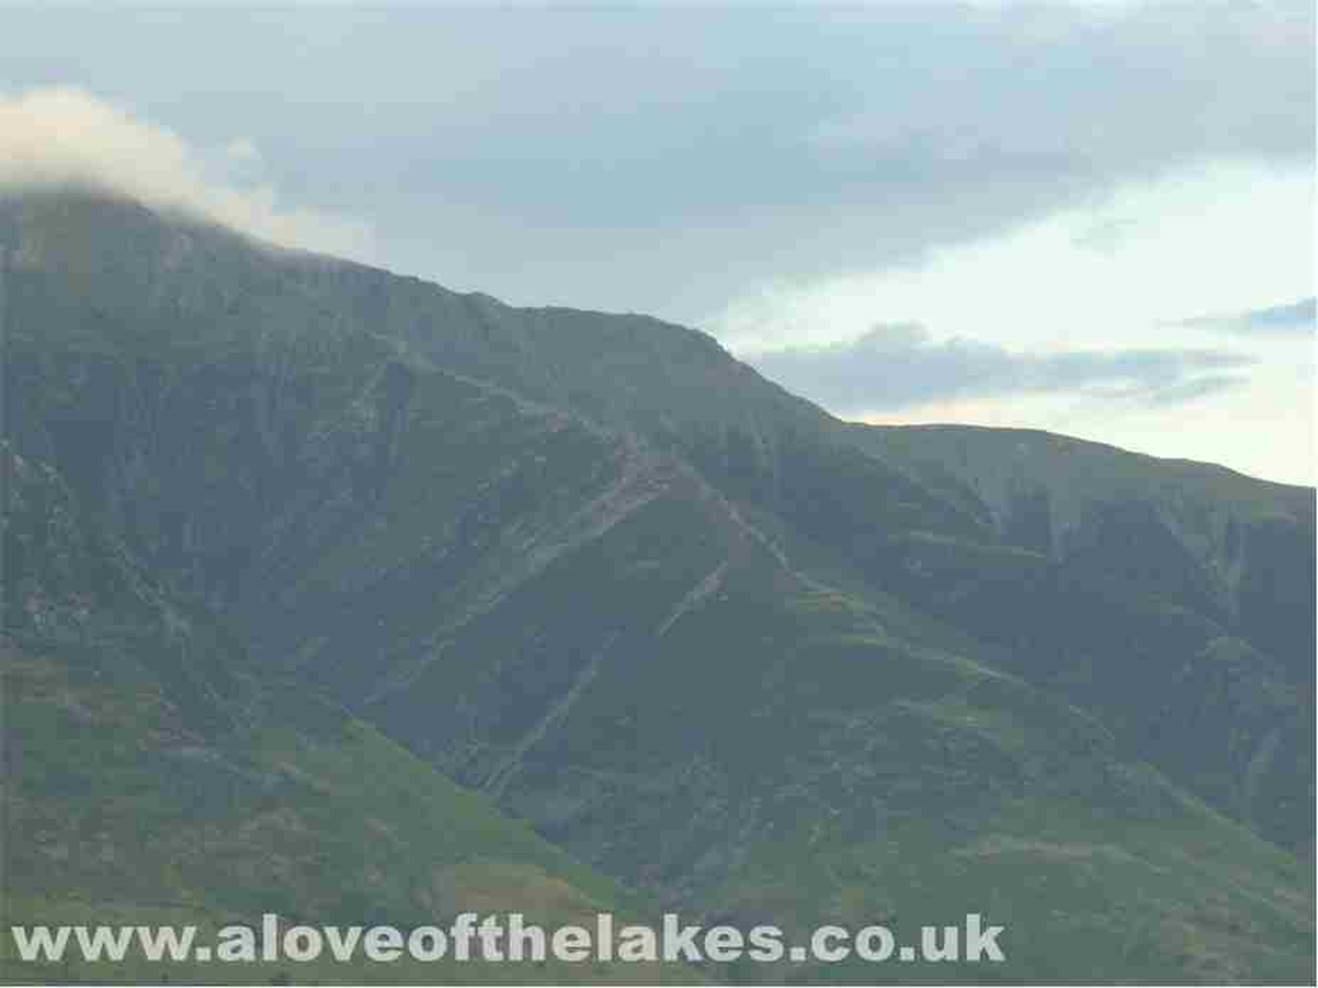 A close up on Blencathra, the central ridge is Halls Fell that leads directly to the summit